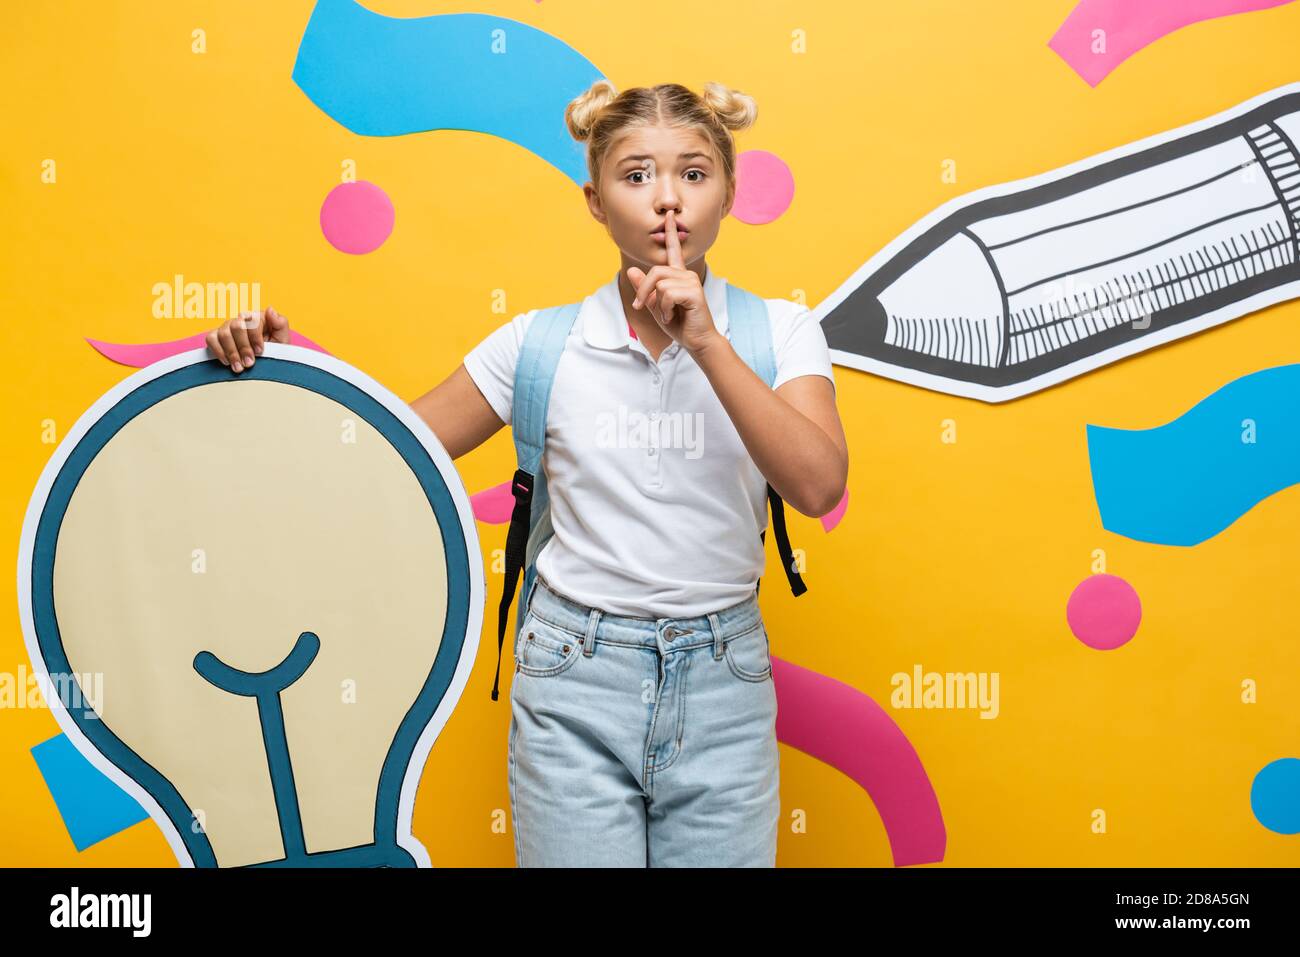 Schoolgirl showing quiet gesture while holding decorative light bulb near paper art on yellow background Stock Photo